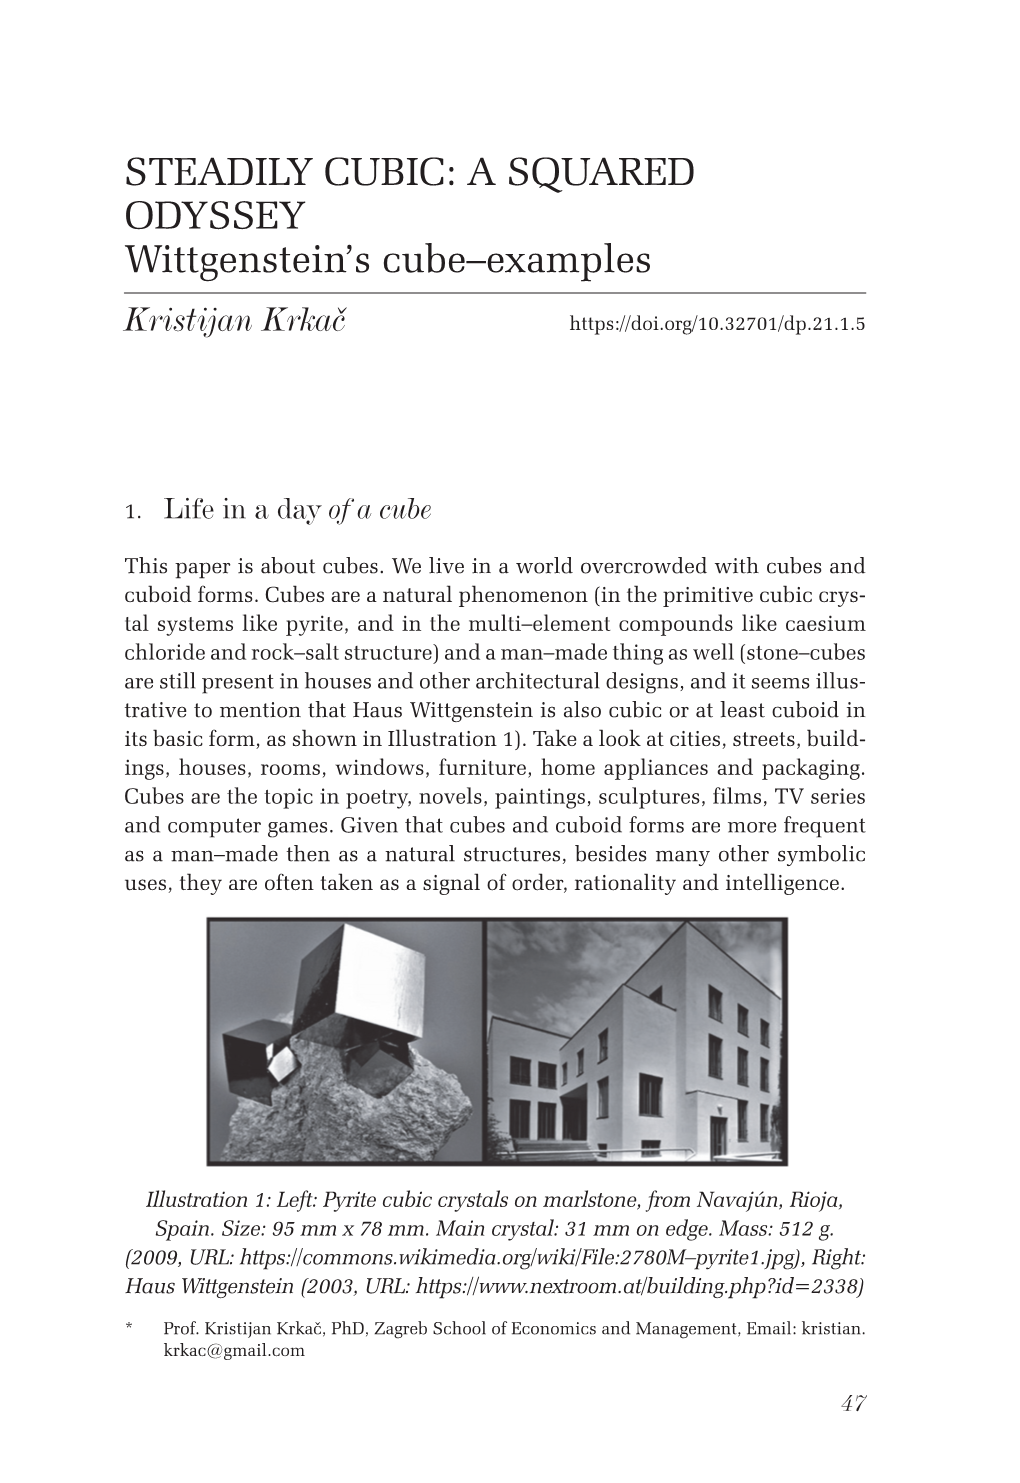 A SQUARED ODYSSEY Wittgenstein's Cube–Examples